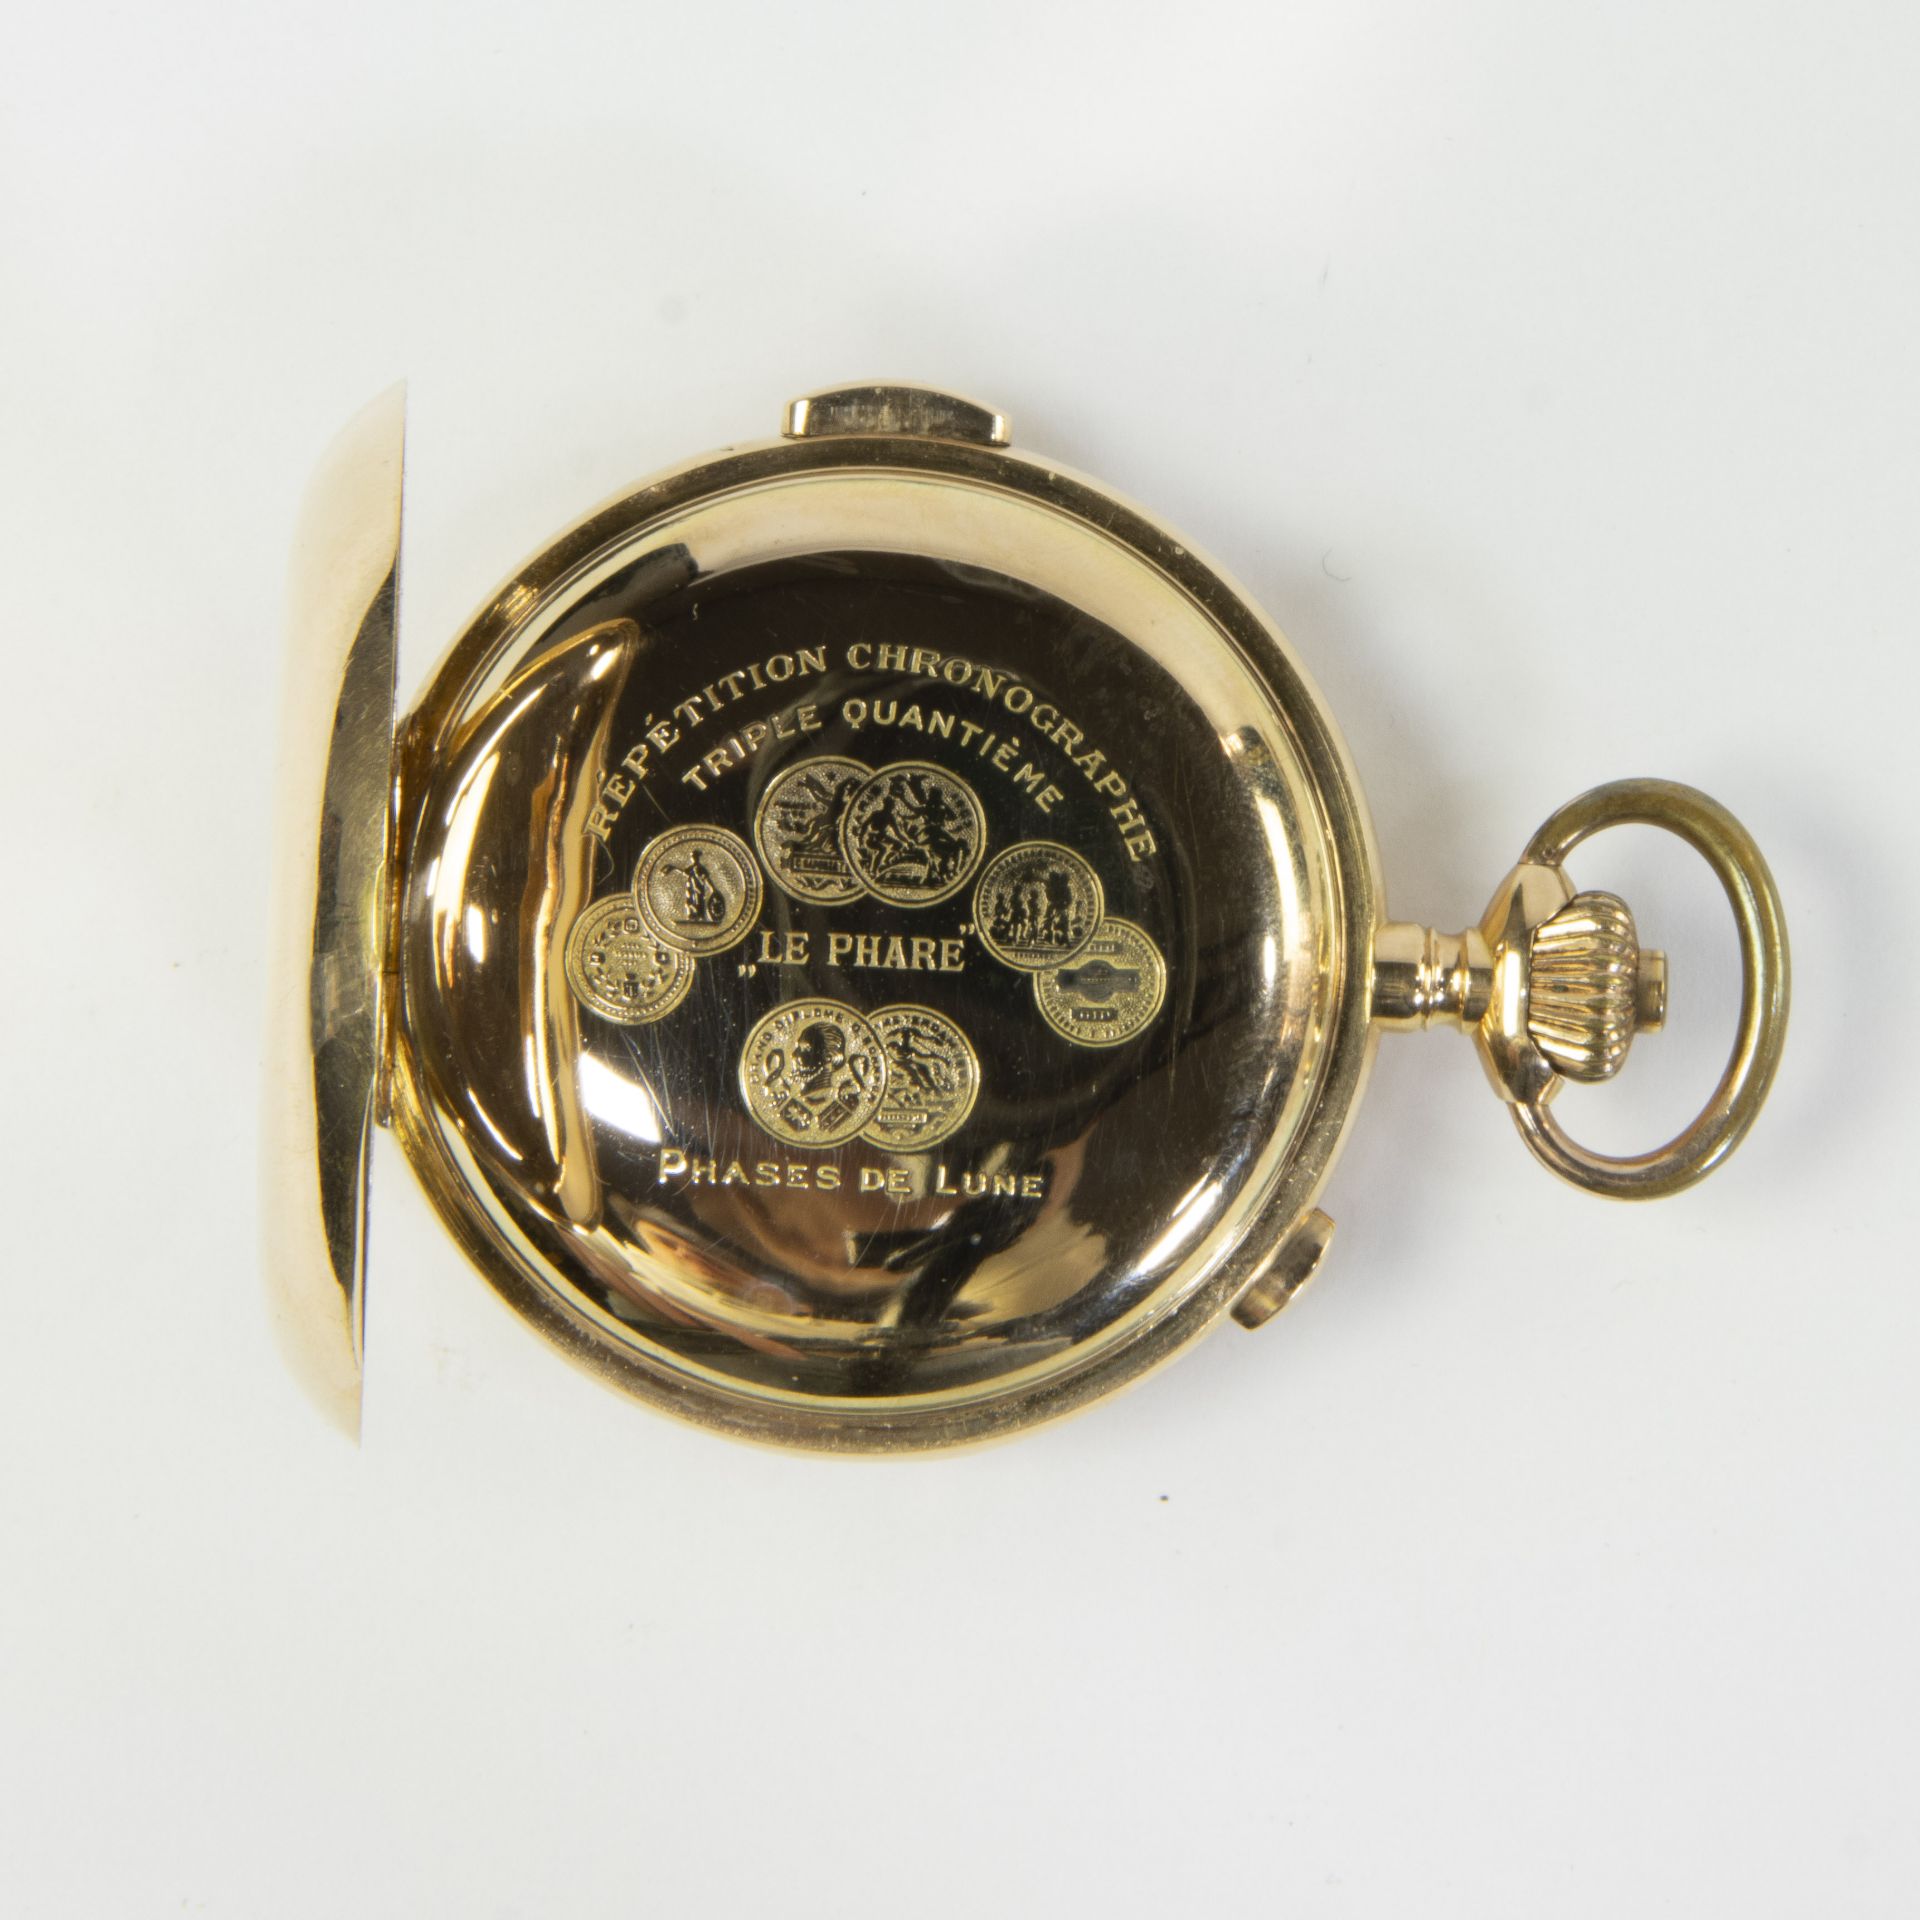 Gold pocket watch 'Le Phare' with golden chain (18 ct), 25 grams, Chronographe répétition, ca 1890 - Image 2 of 4